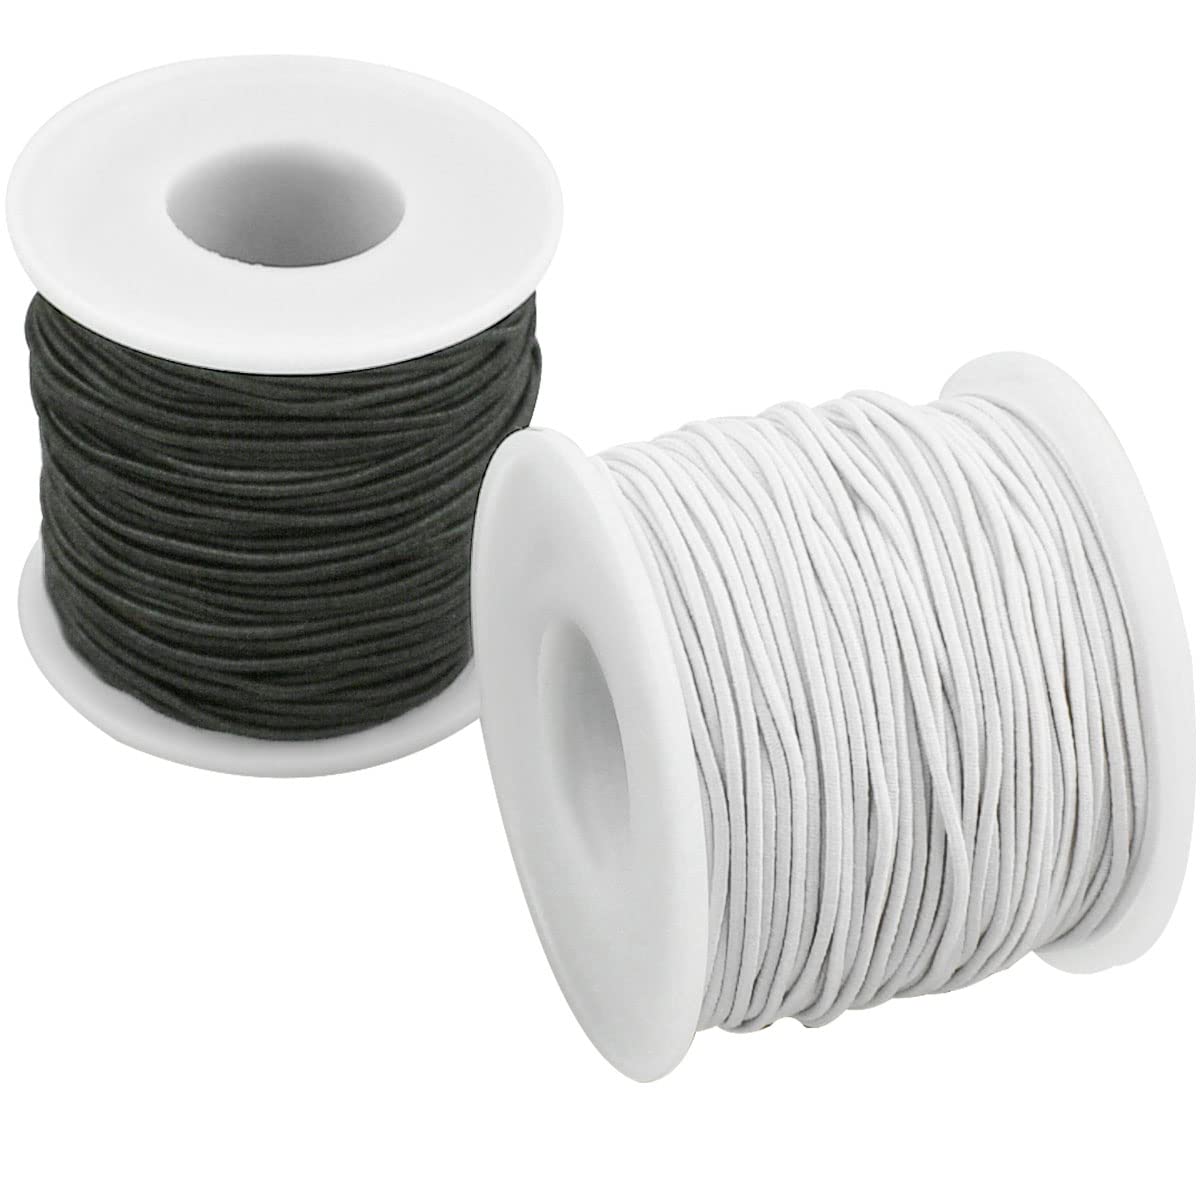 2 Rolls 1 mm Elastic Beading Cord for Bracelet Stretchy Elastic String for Jewelry  Making Sewing